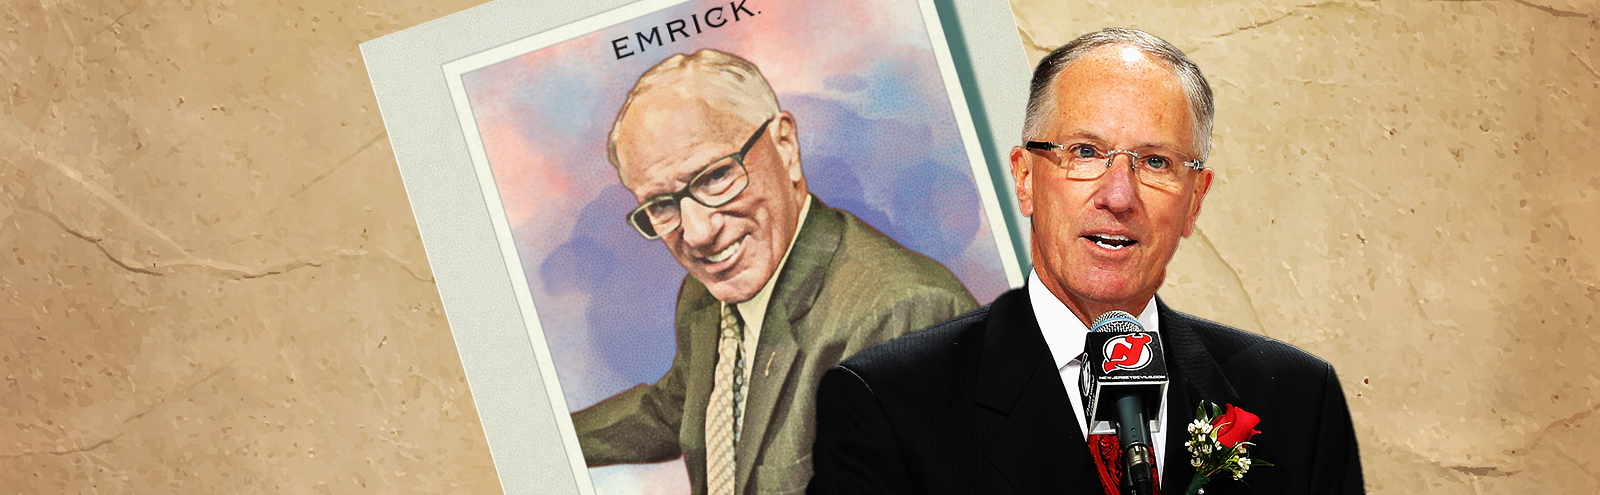 Hockey broadcaster Doc Emrick to call some Pirates spring training games